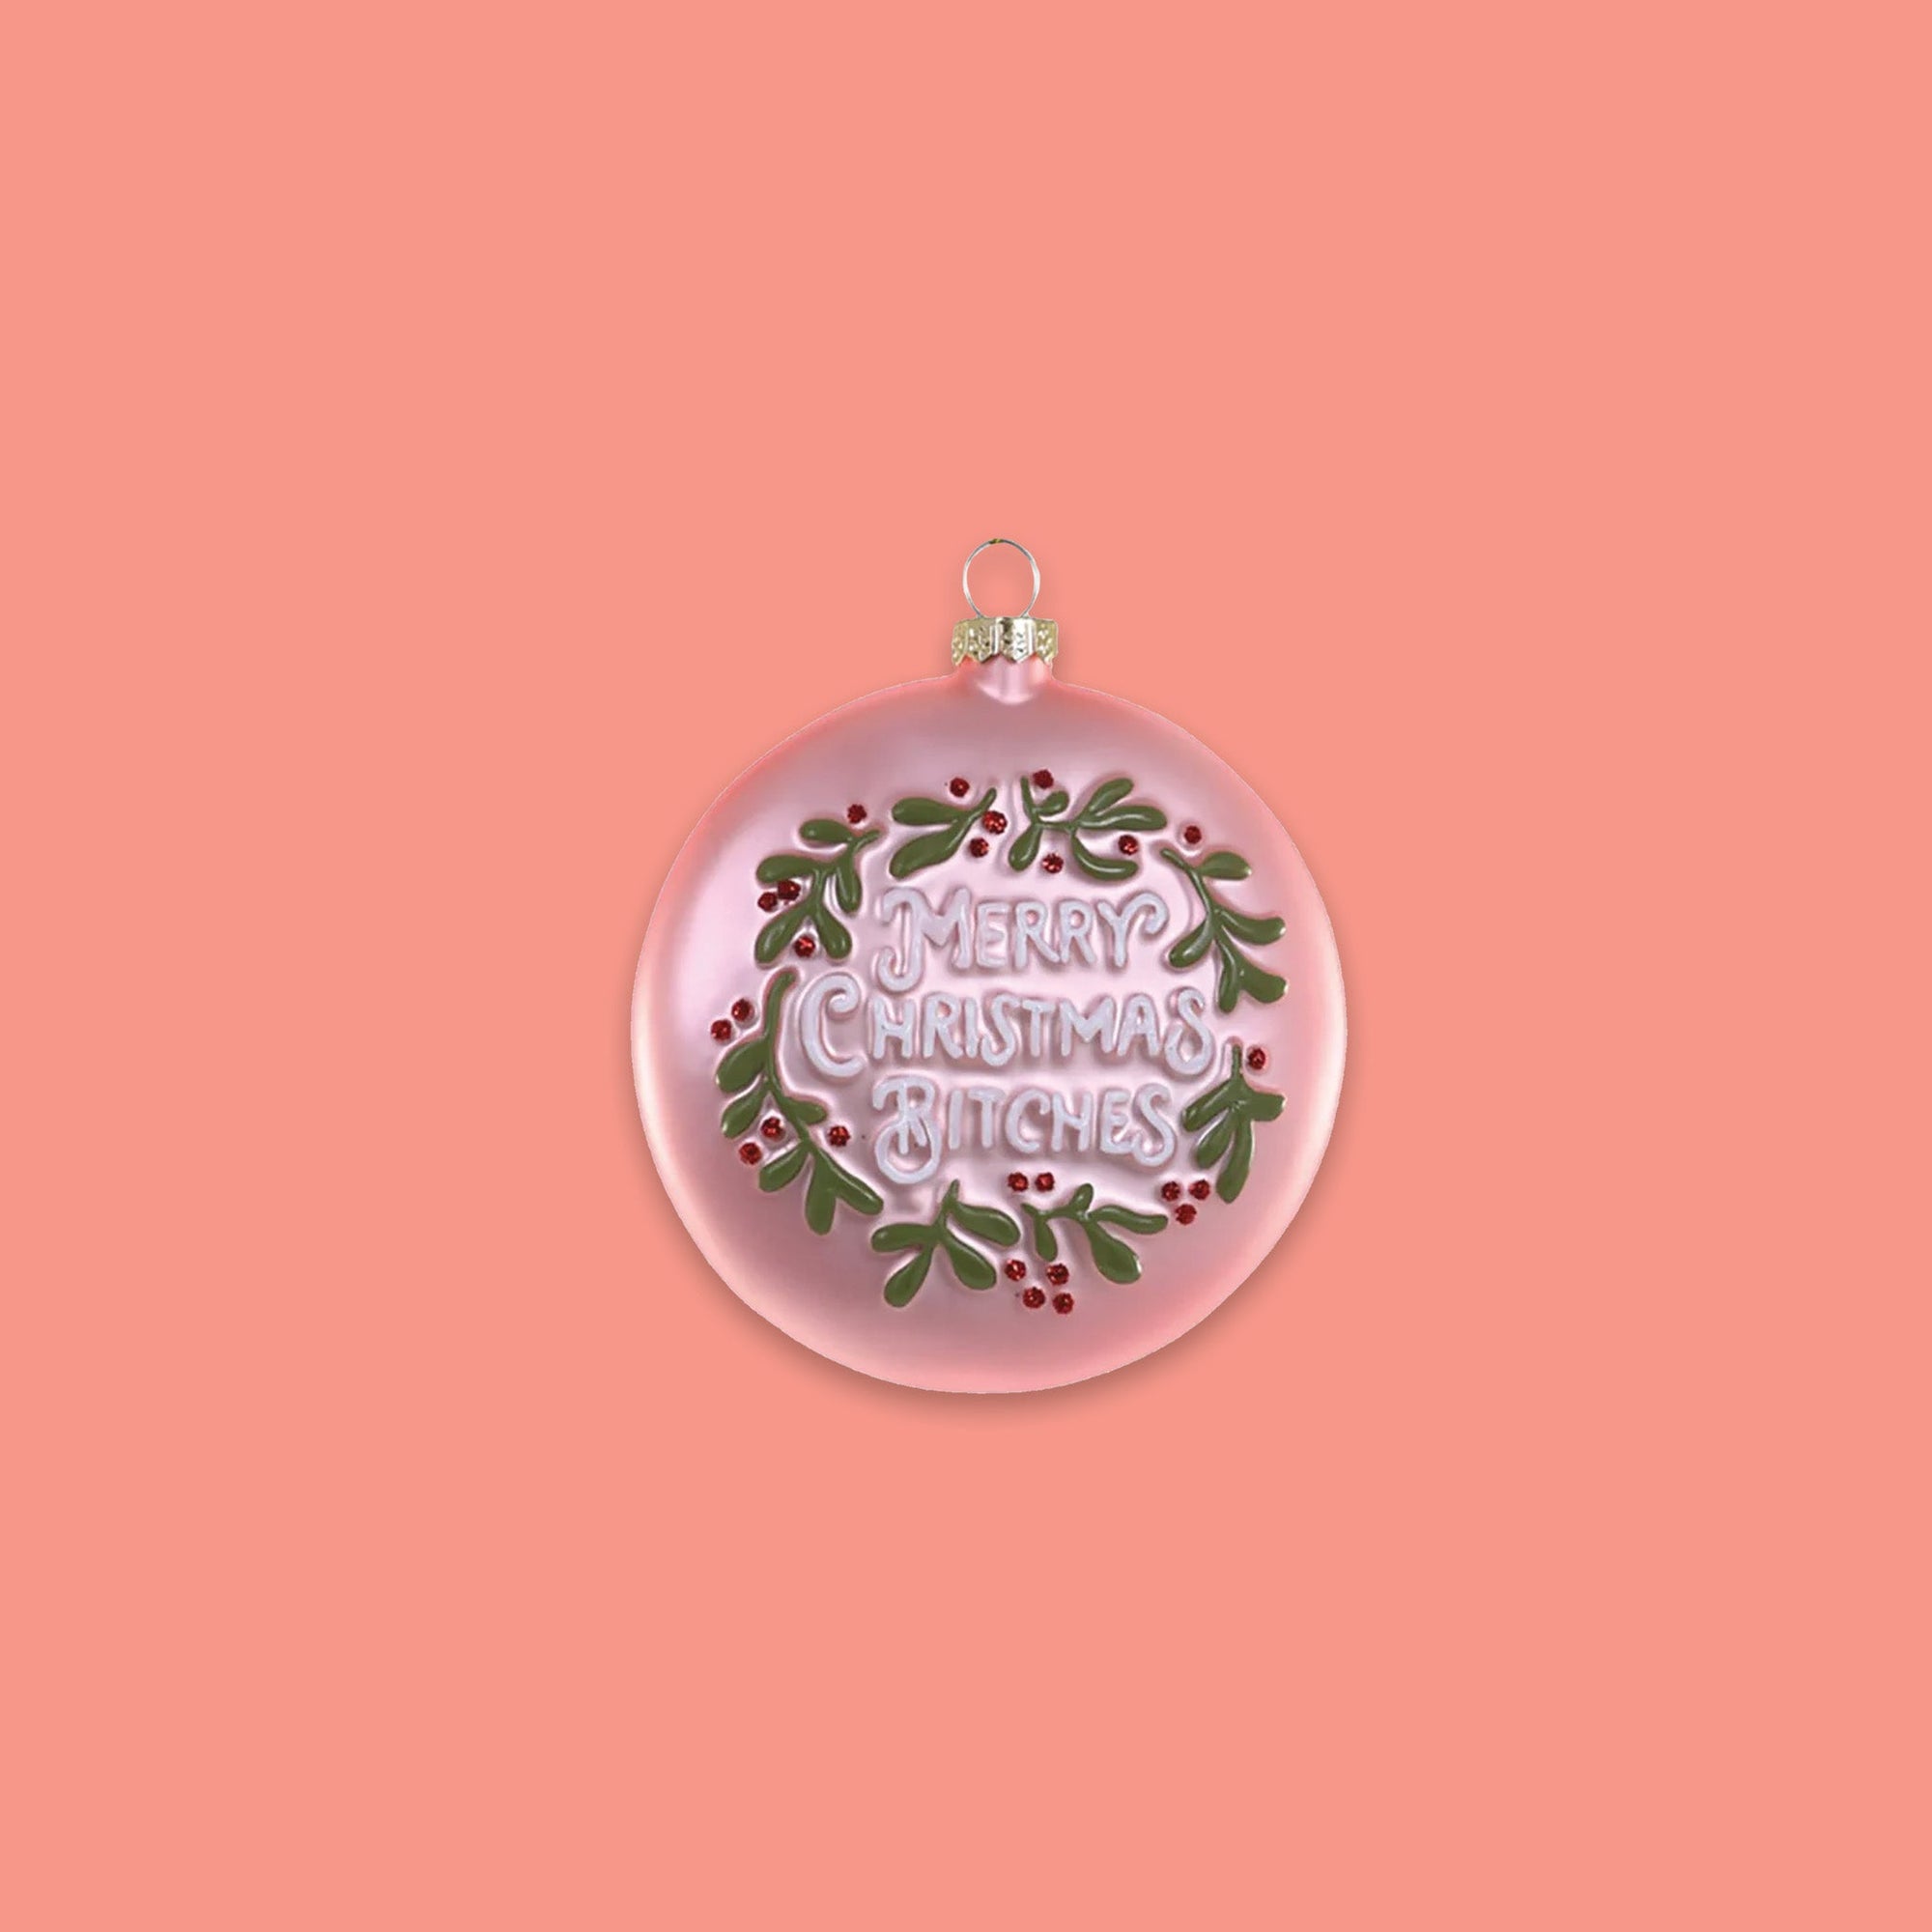 On a coral pink background sits a round ornament. This glass ornament is pink with green and red hollies and berries and it says "MERRY CHRISTMAS BITCHES" in white lettering.